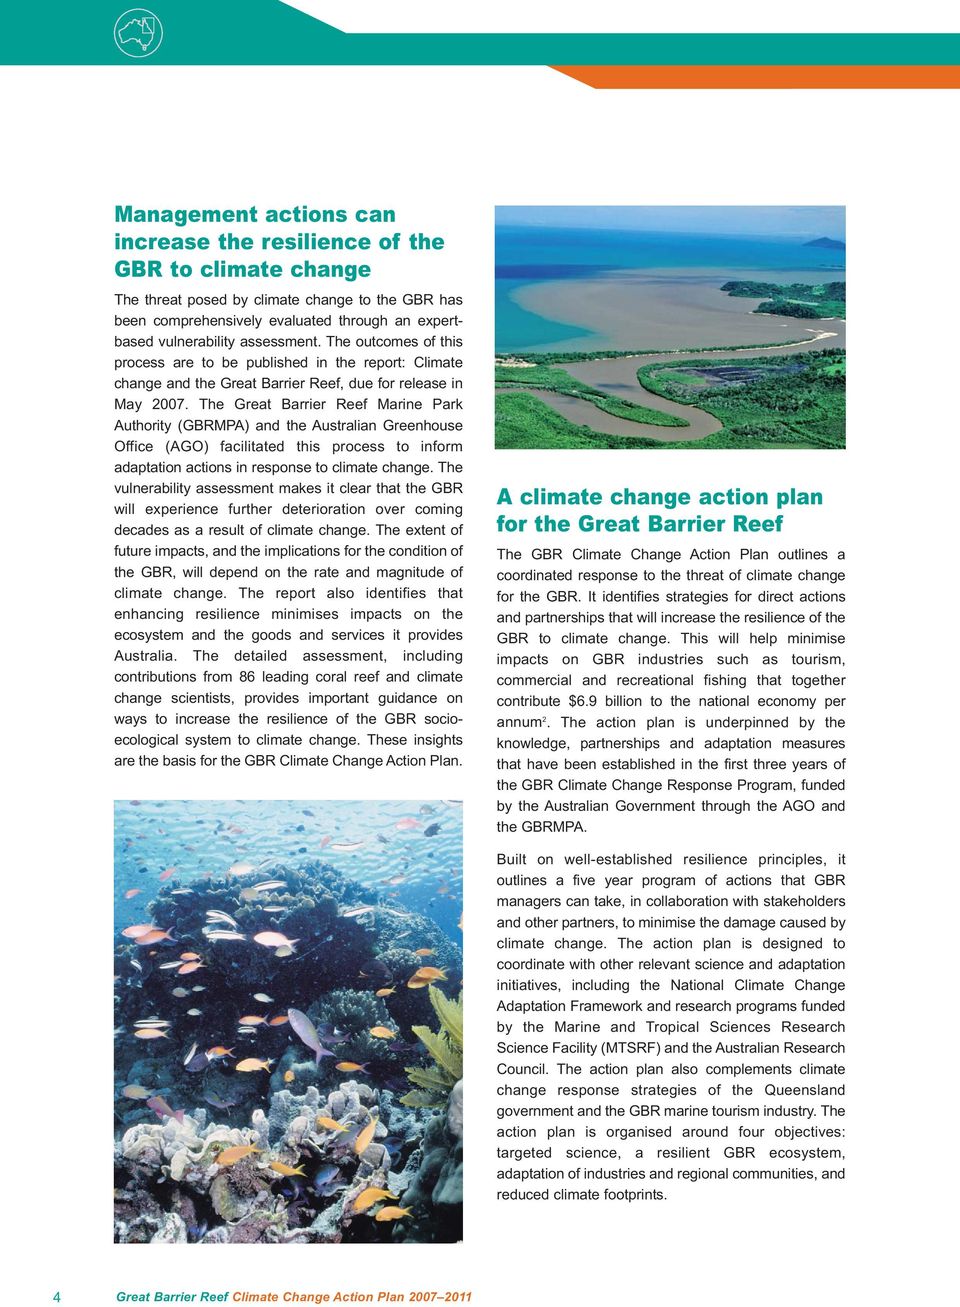 The Great Barrier Reef Marine Park Authority (GBRMPA) and the Australian Greenhouse Office (AGO) facilitated this process to inform adaptation actions in response to climate change.